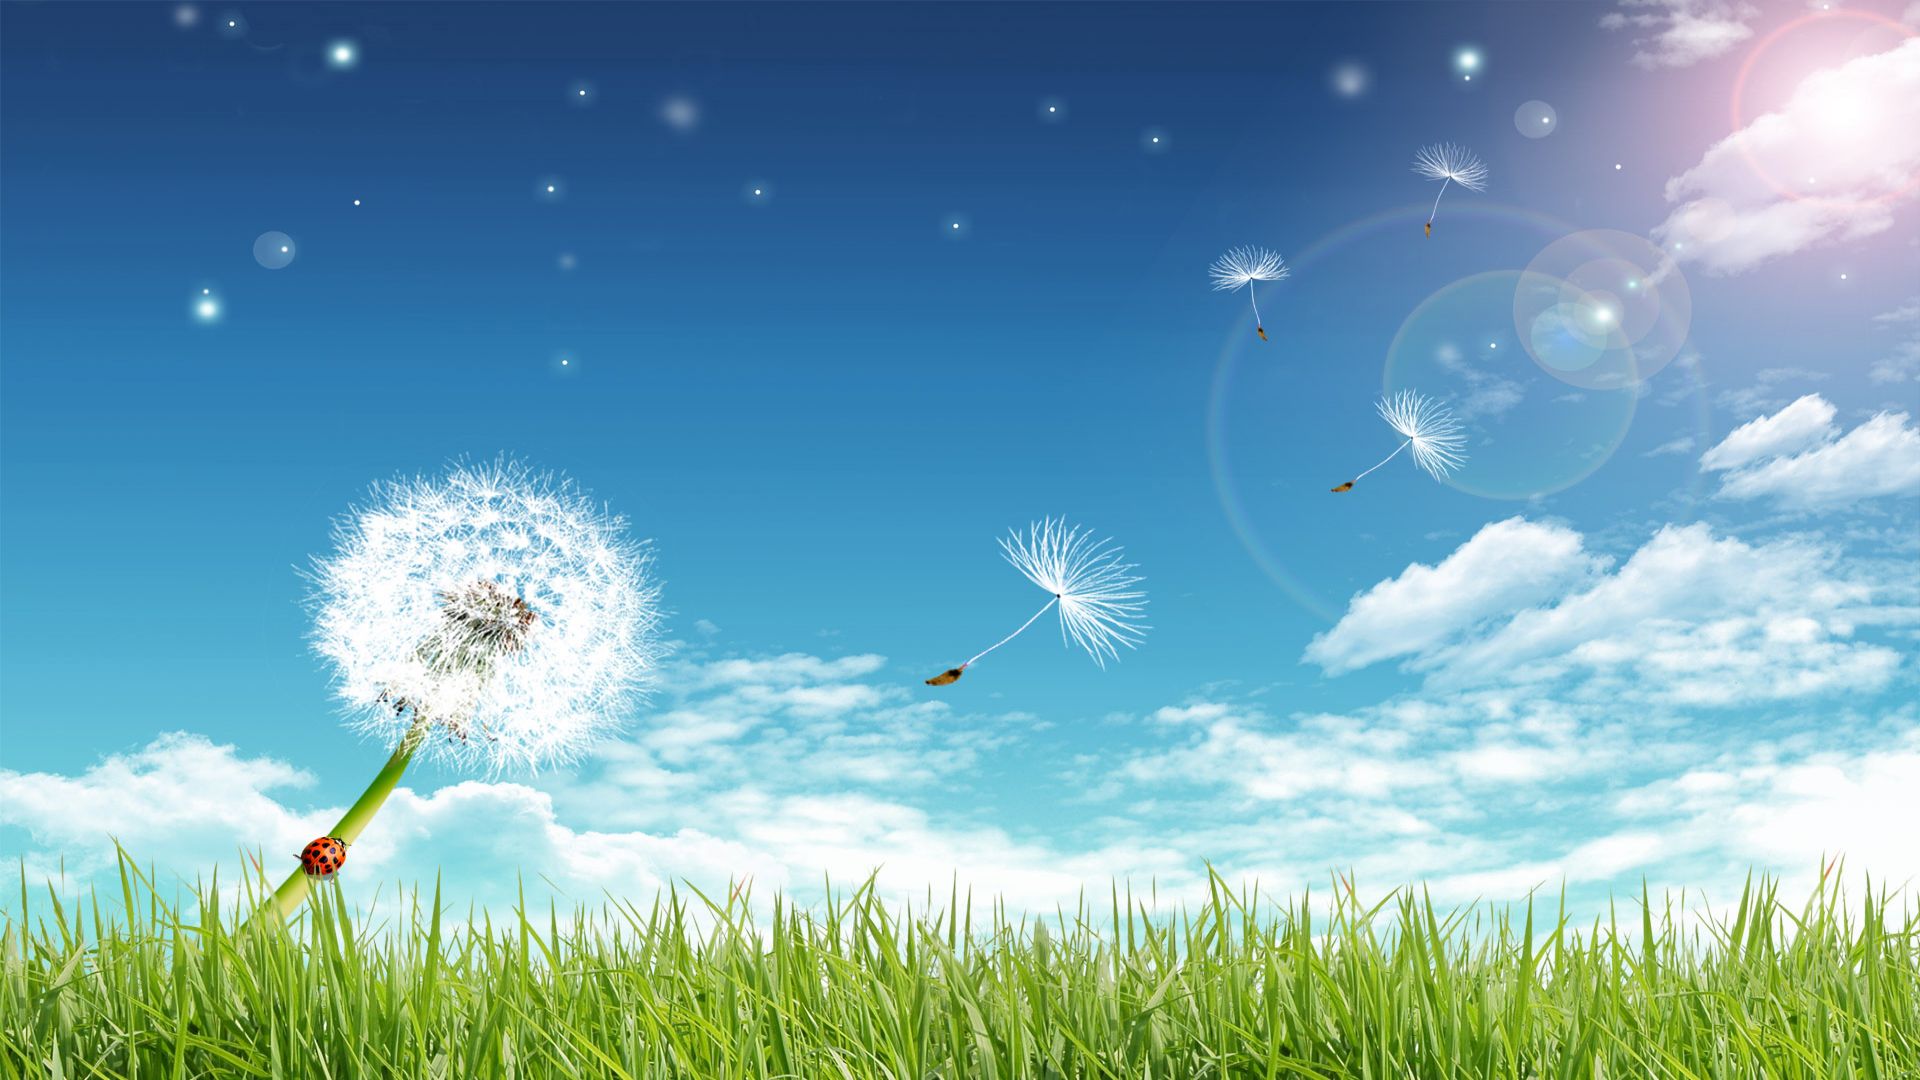 Summer Nature Backgrounds 1920x1080